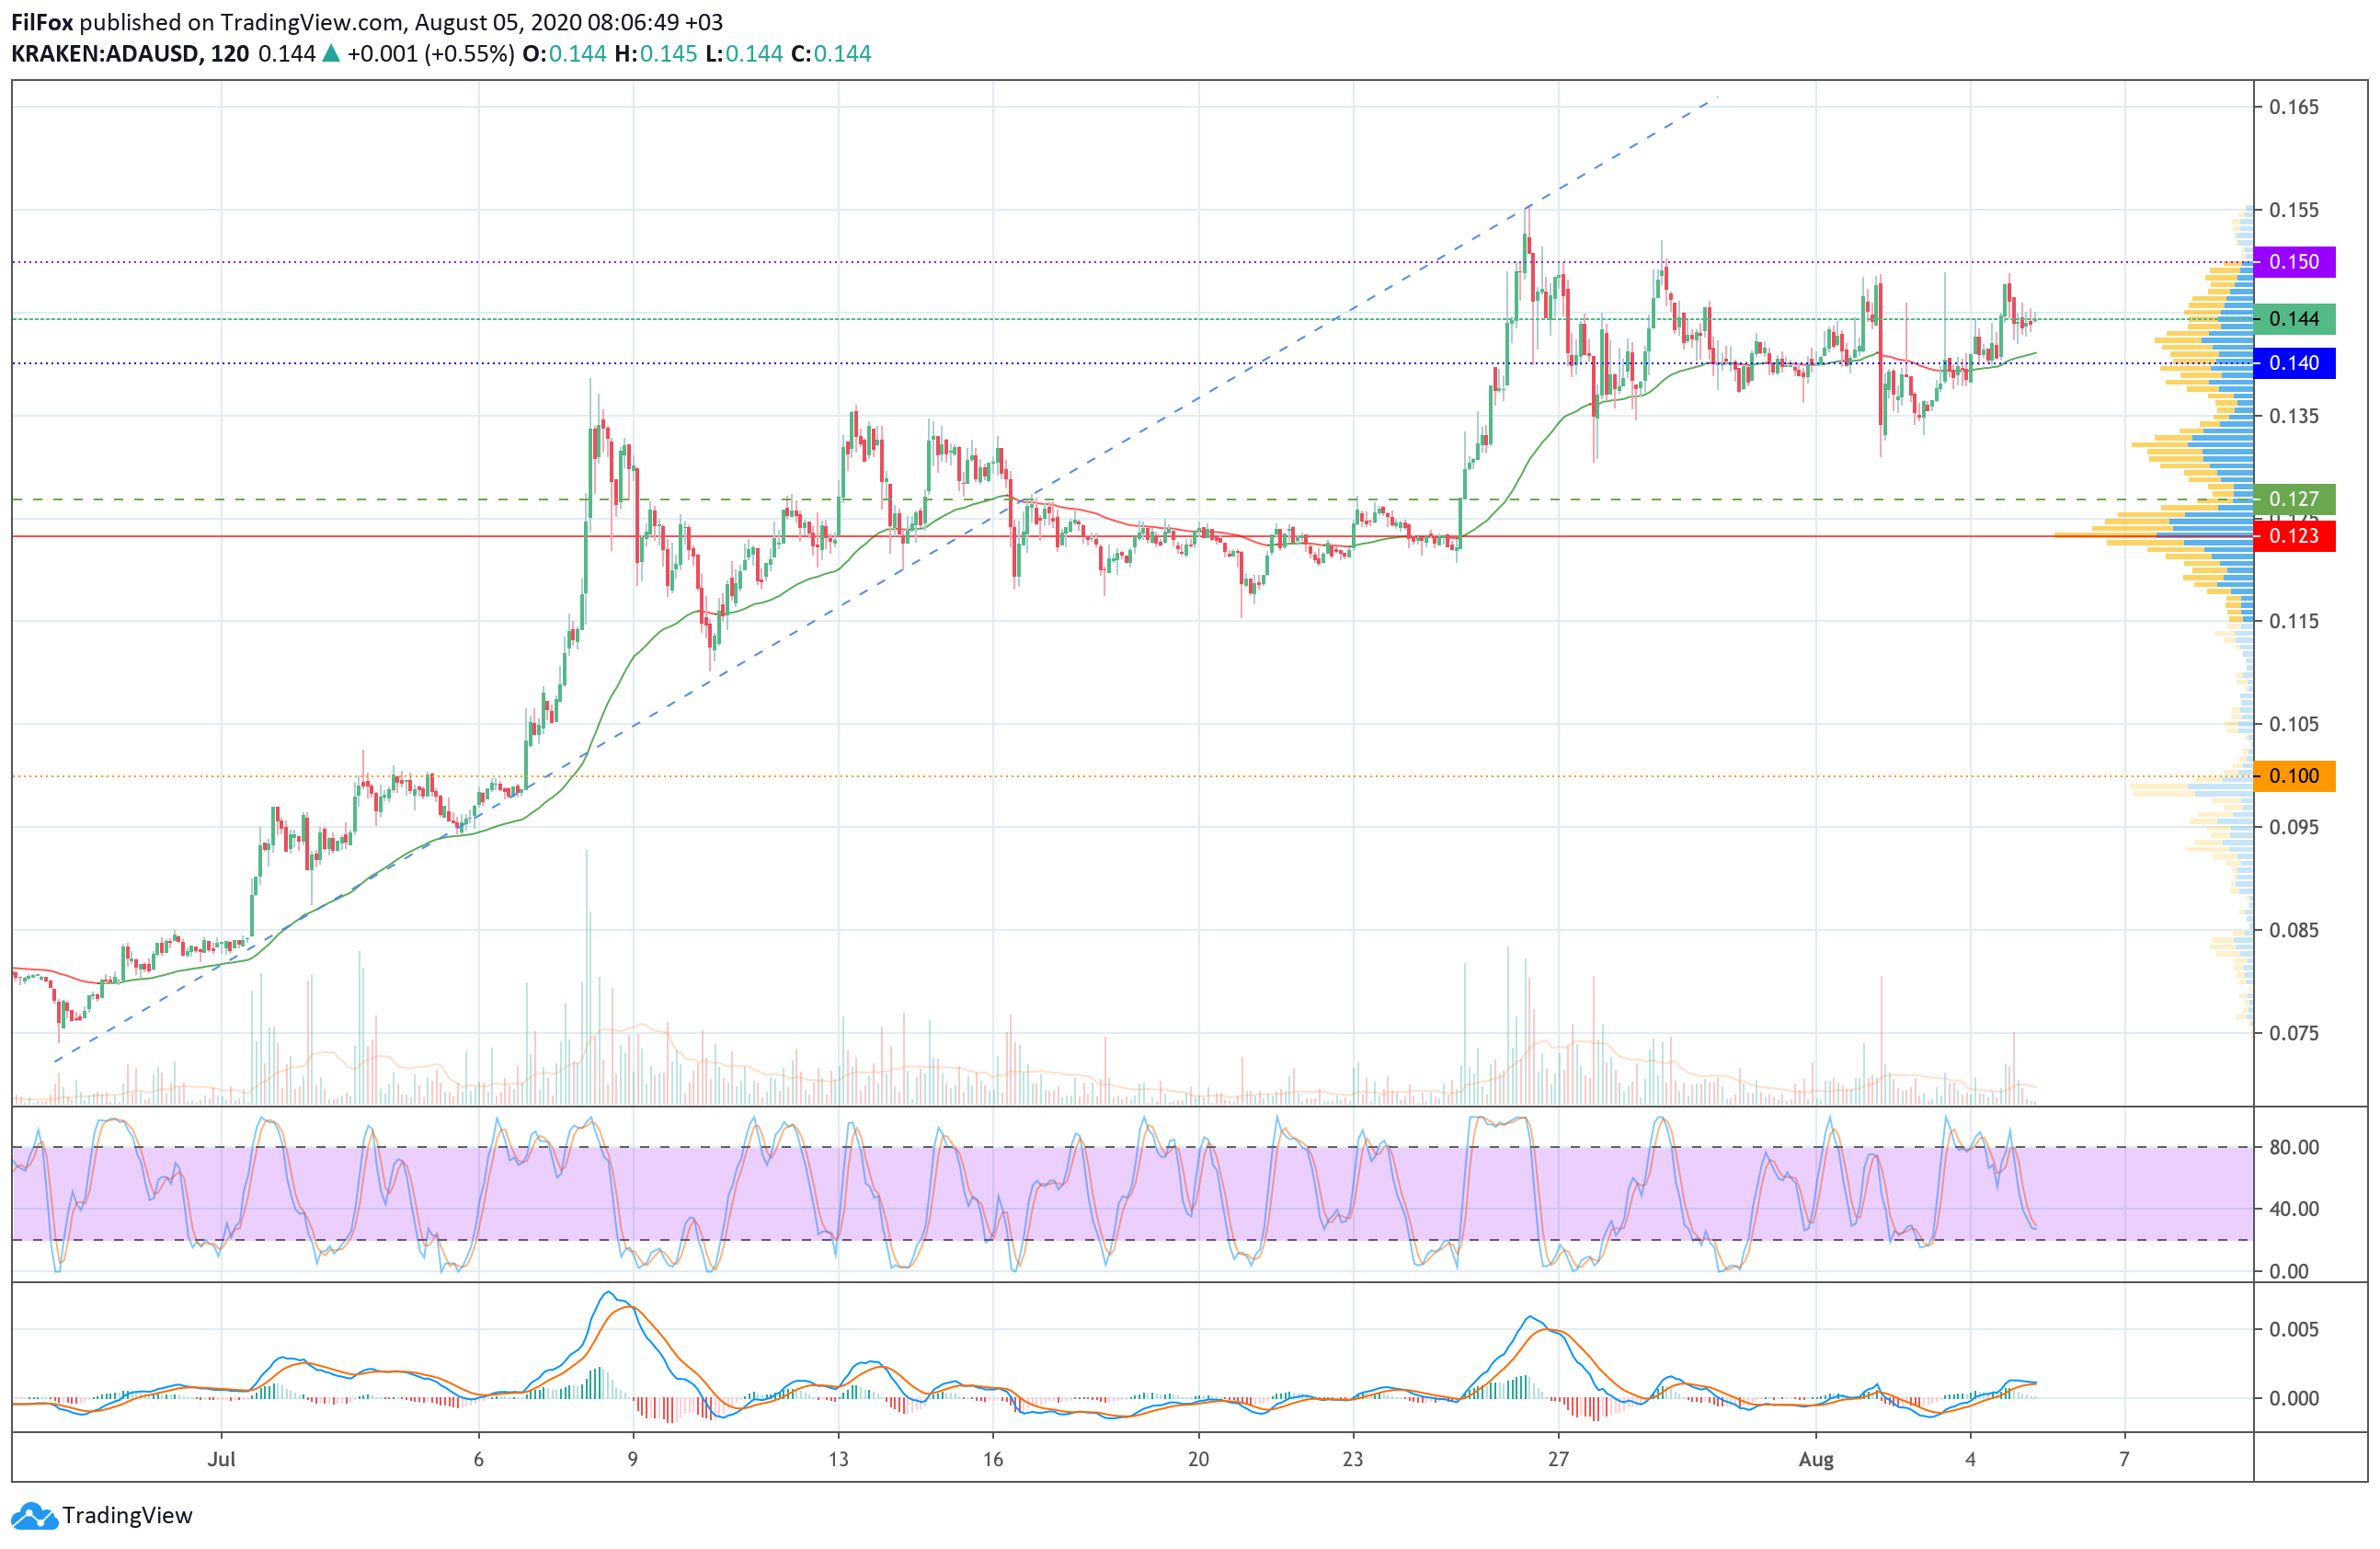 Analysis of the prices of Bitcoin Cash, Litecoin, Cardano, EOS and Stellar for 08/05/2020